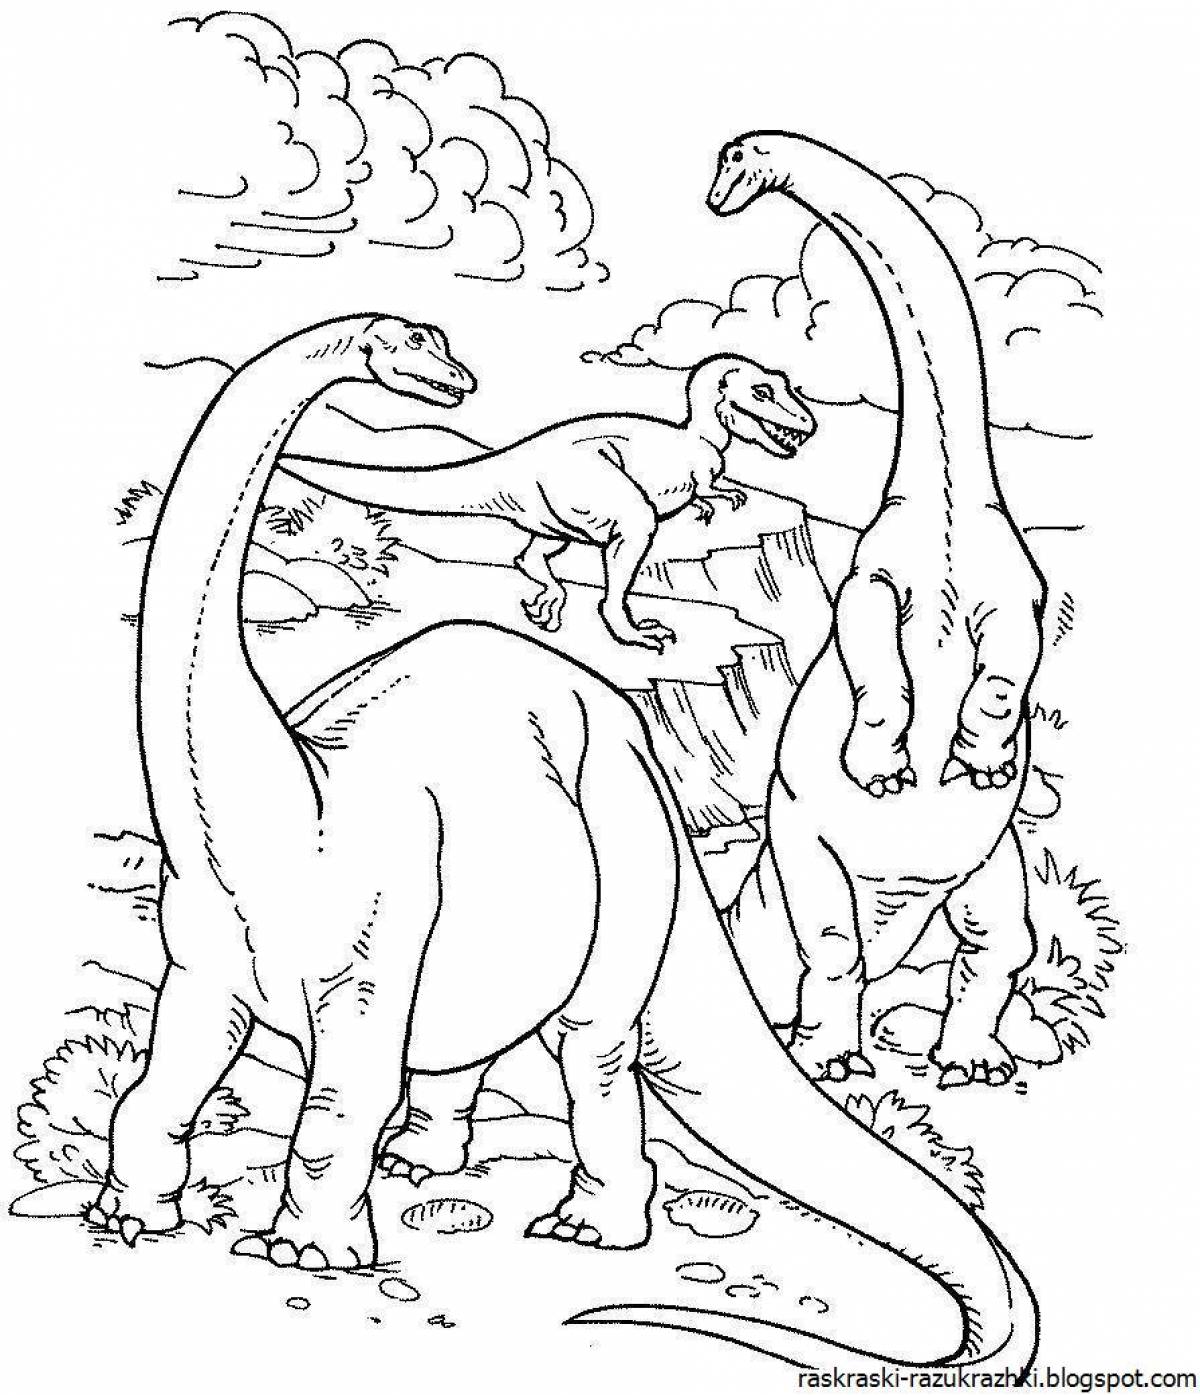 Dinosaurs for children 5 6 years old #10